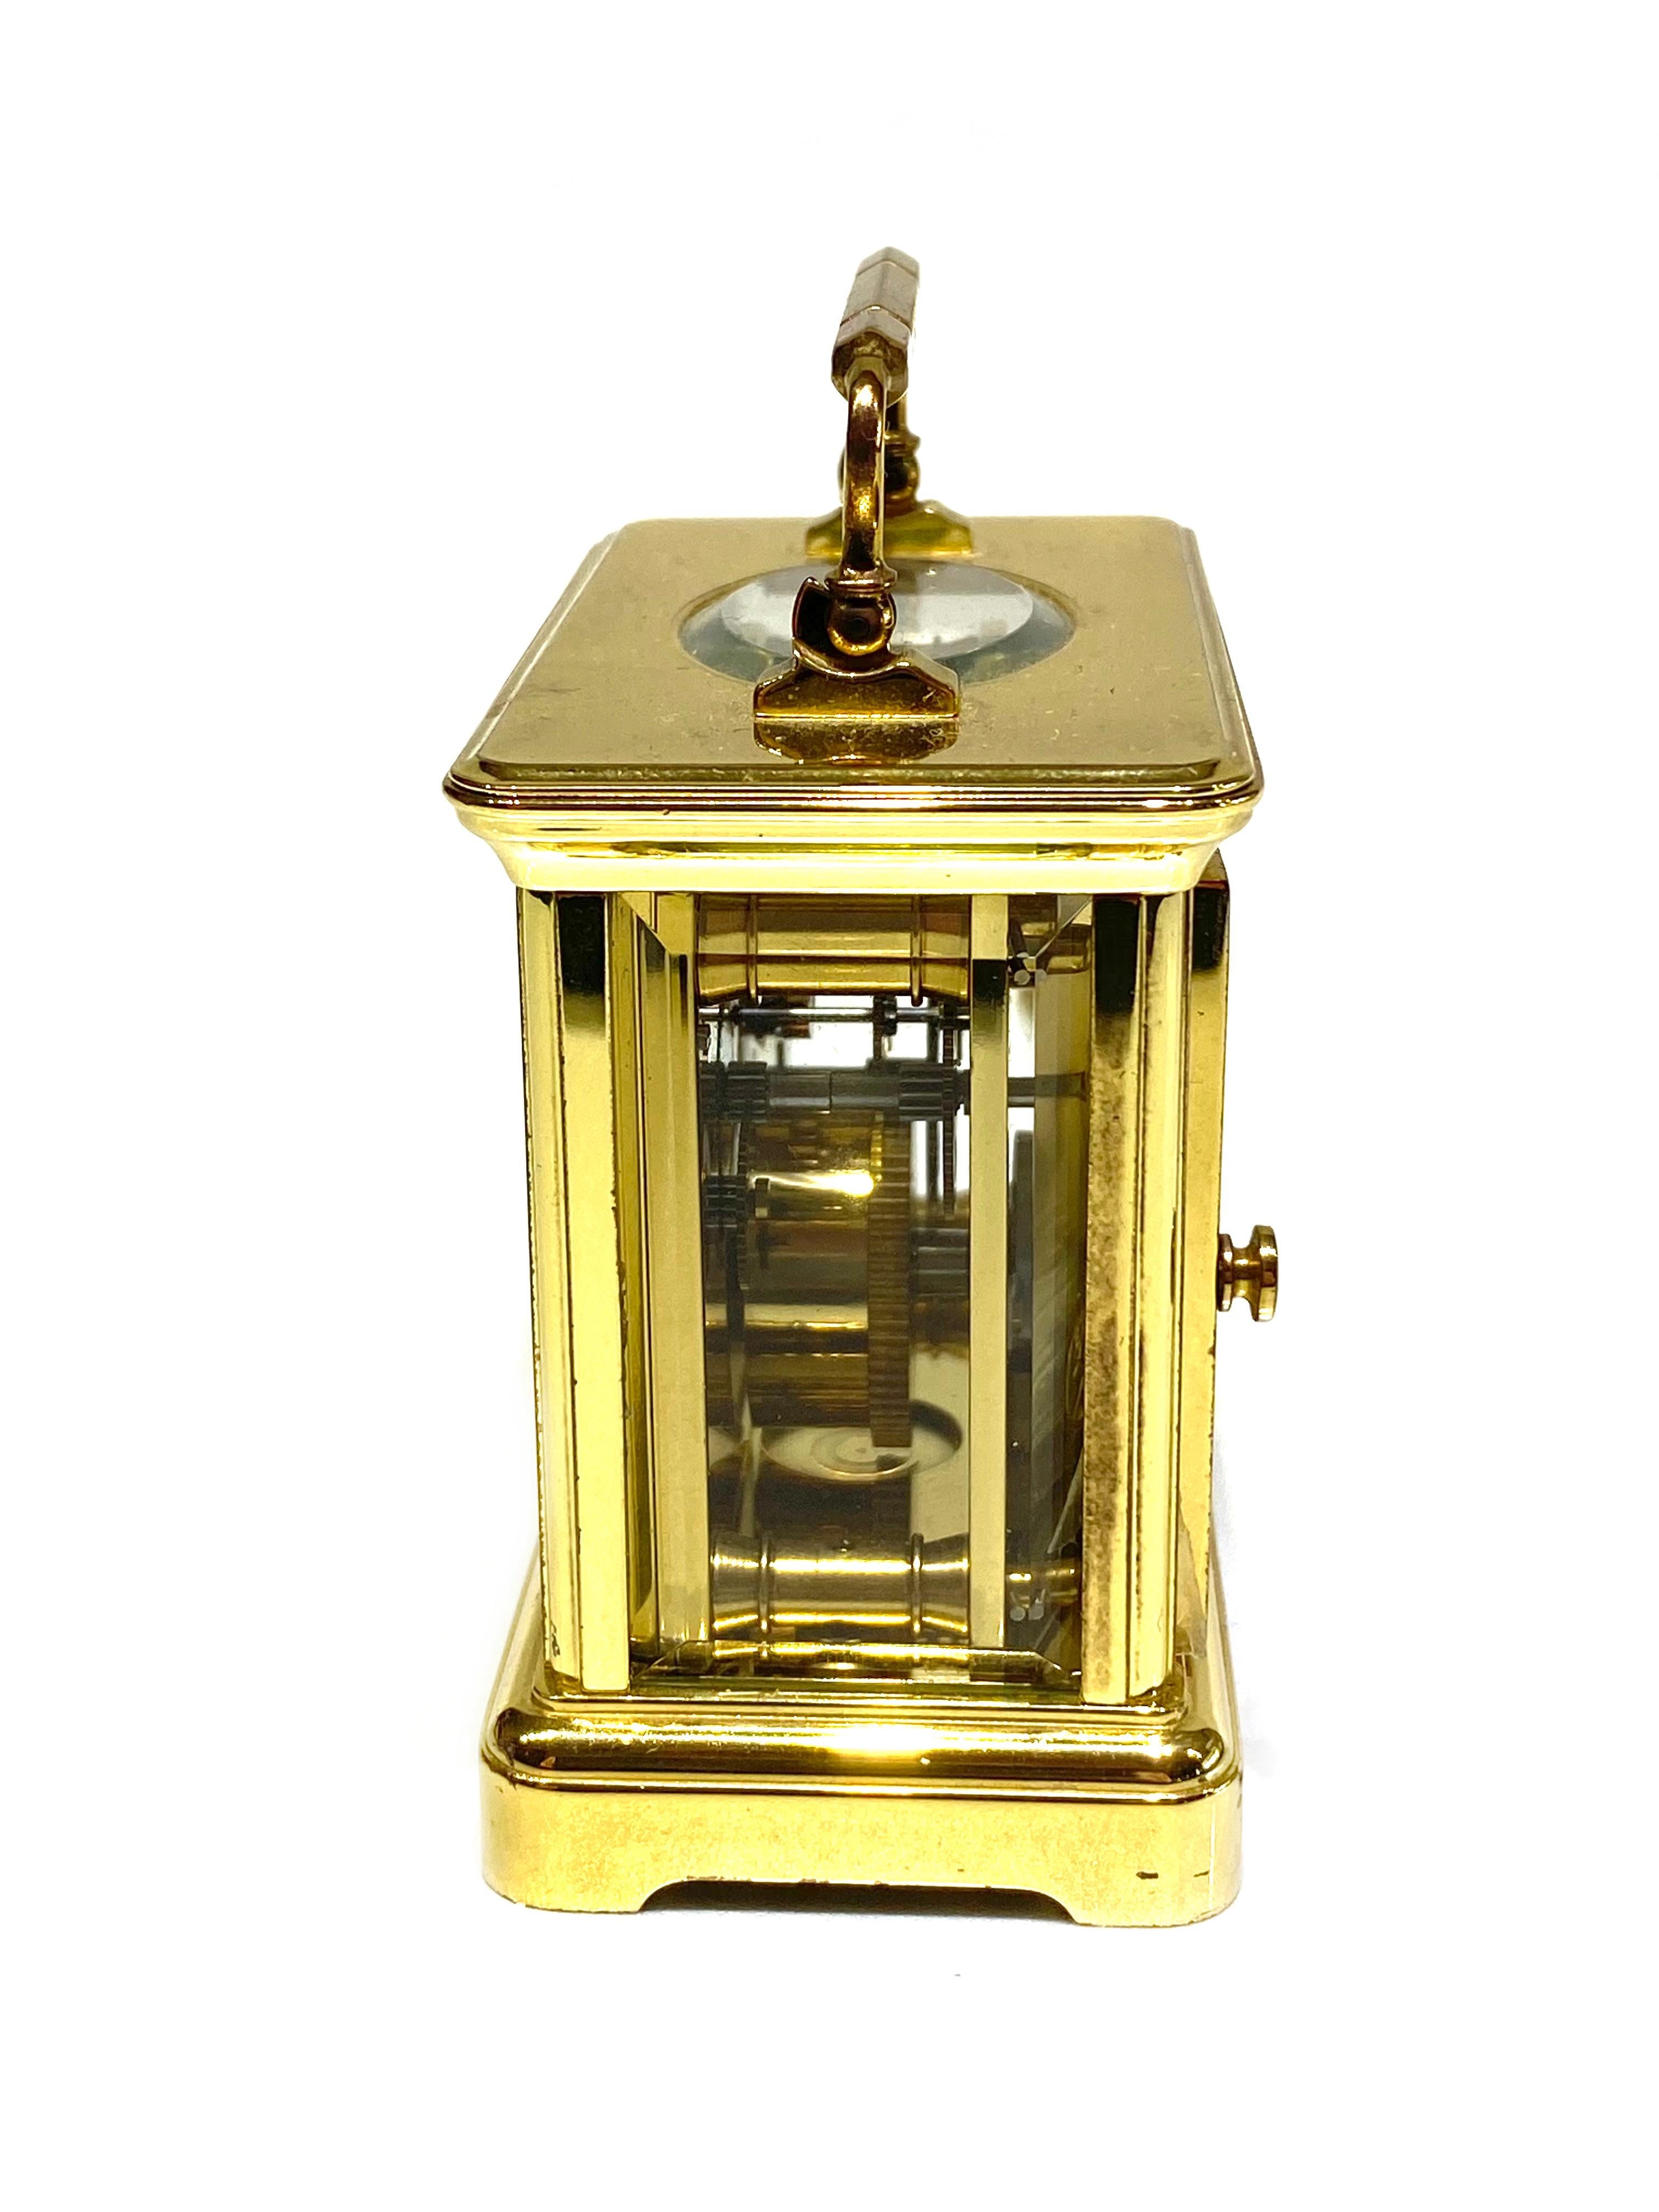 1800s Asprey Paris Bronze Brass and Crystal Travel Desk Clock 

Product details:
Circa 1839
Here/ There travel clock
Comes with two winding keys
Made in France 
Total weight is 491.9 grams